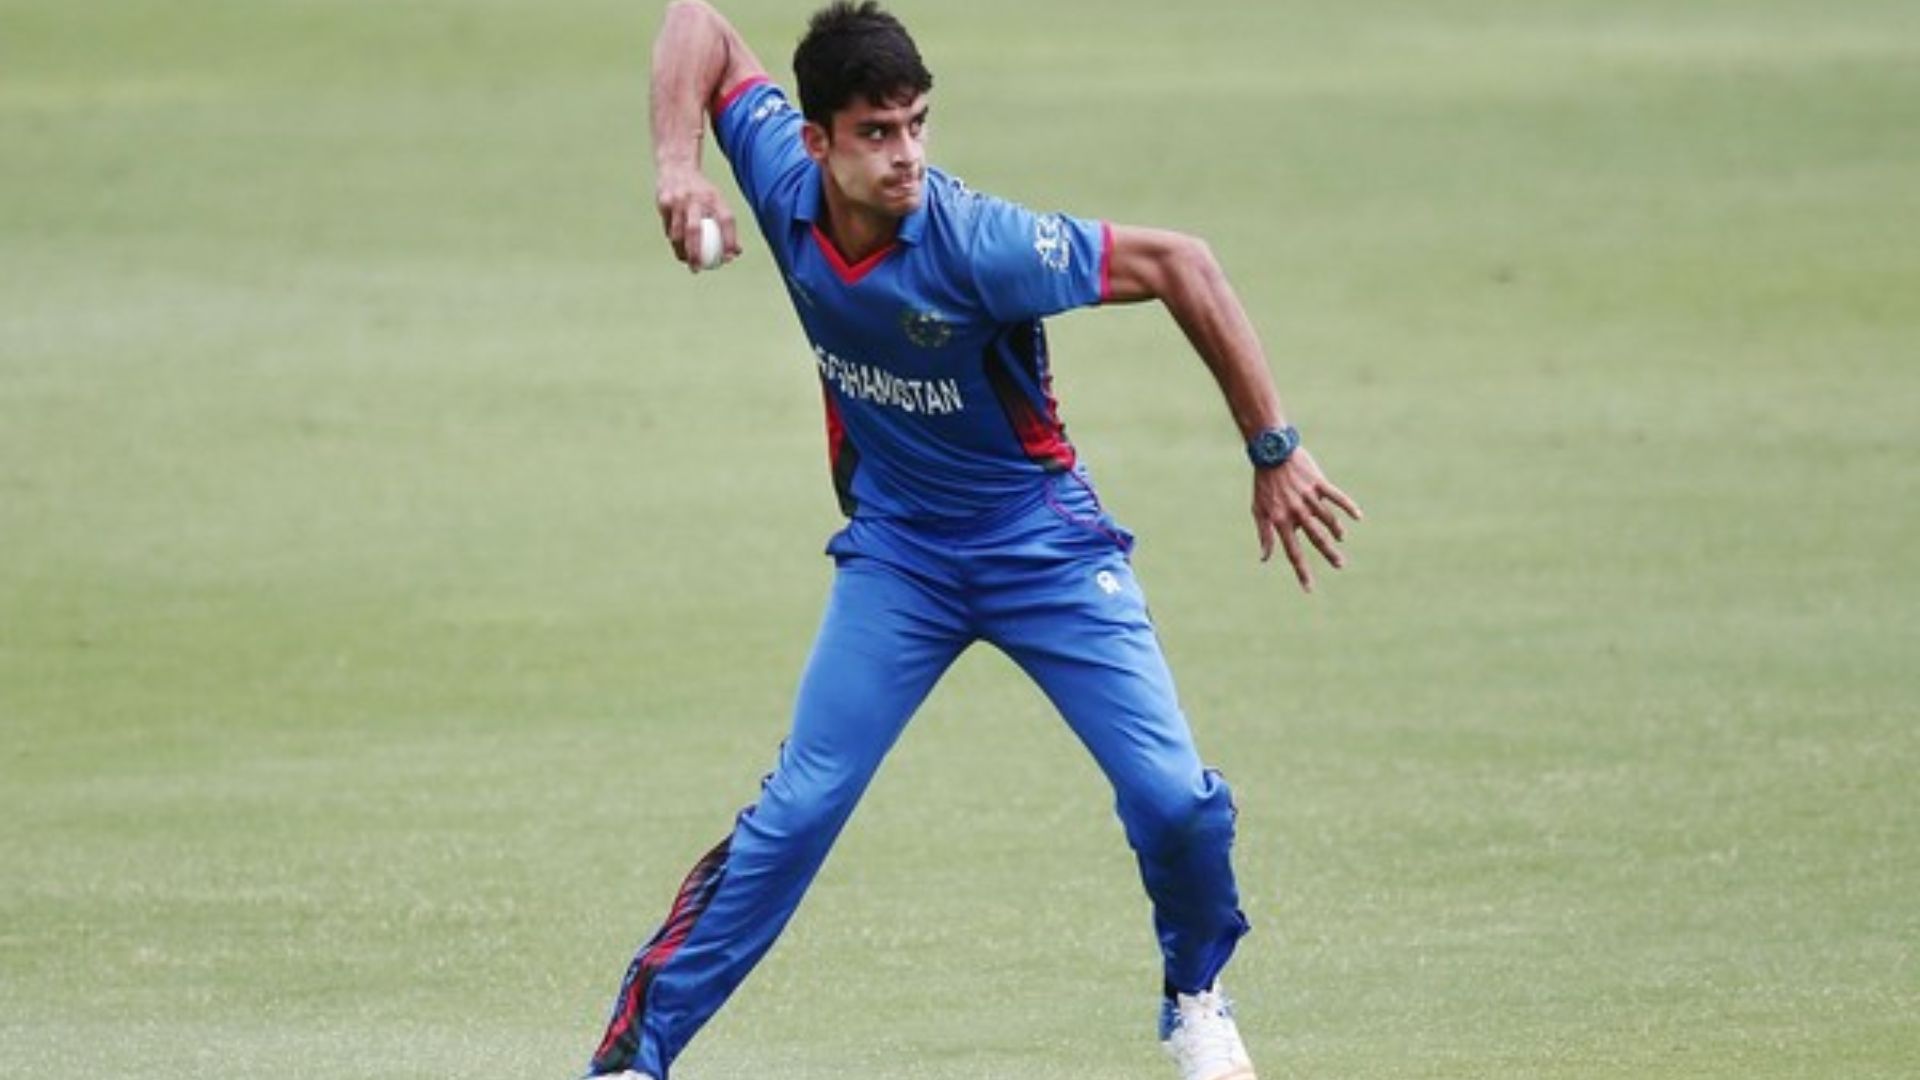 Naveen-ul-Haq strictly banned for 20 months from participation in ILT20 due to breach of contract